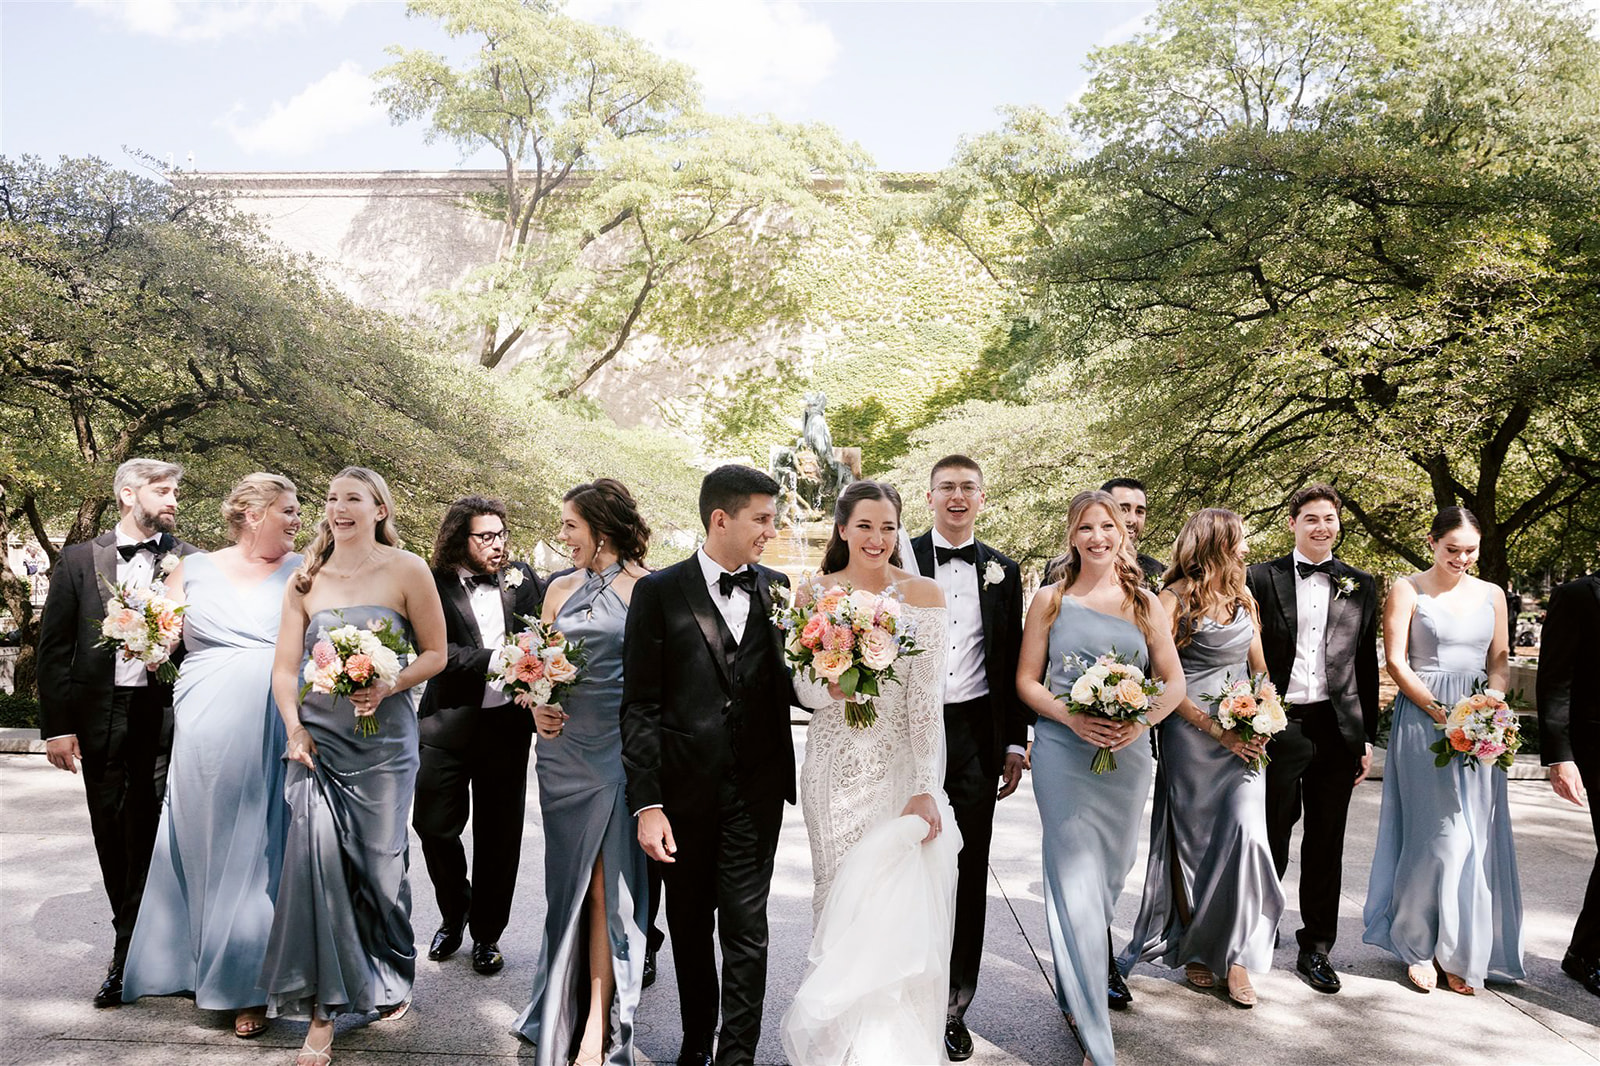 Amidst Chicago's Art Institute gardens, a picturesque gathering of the wedding party unfolds in elegant splendor.